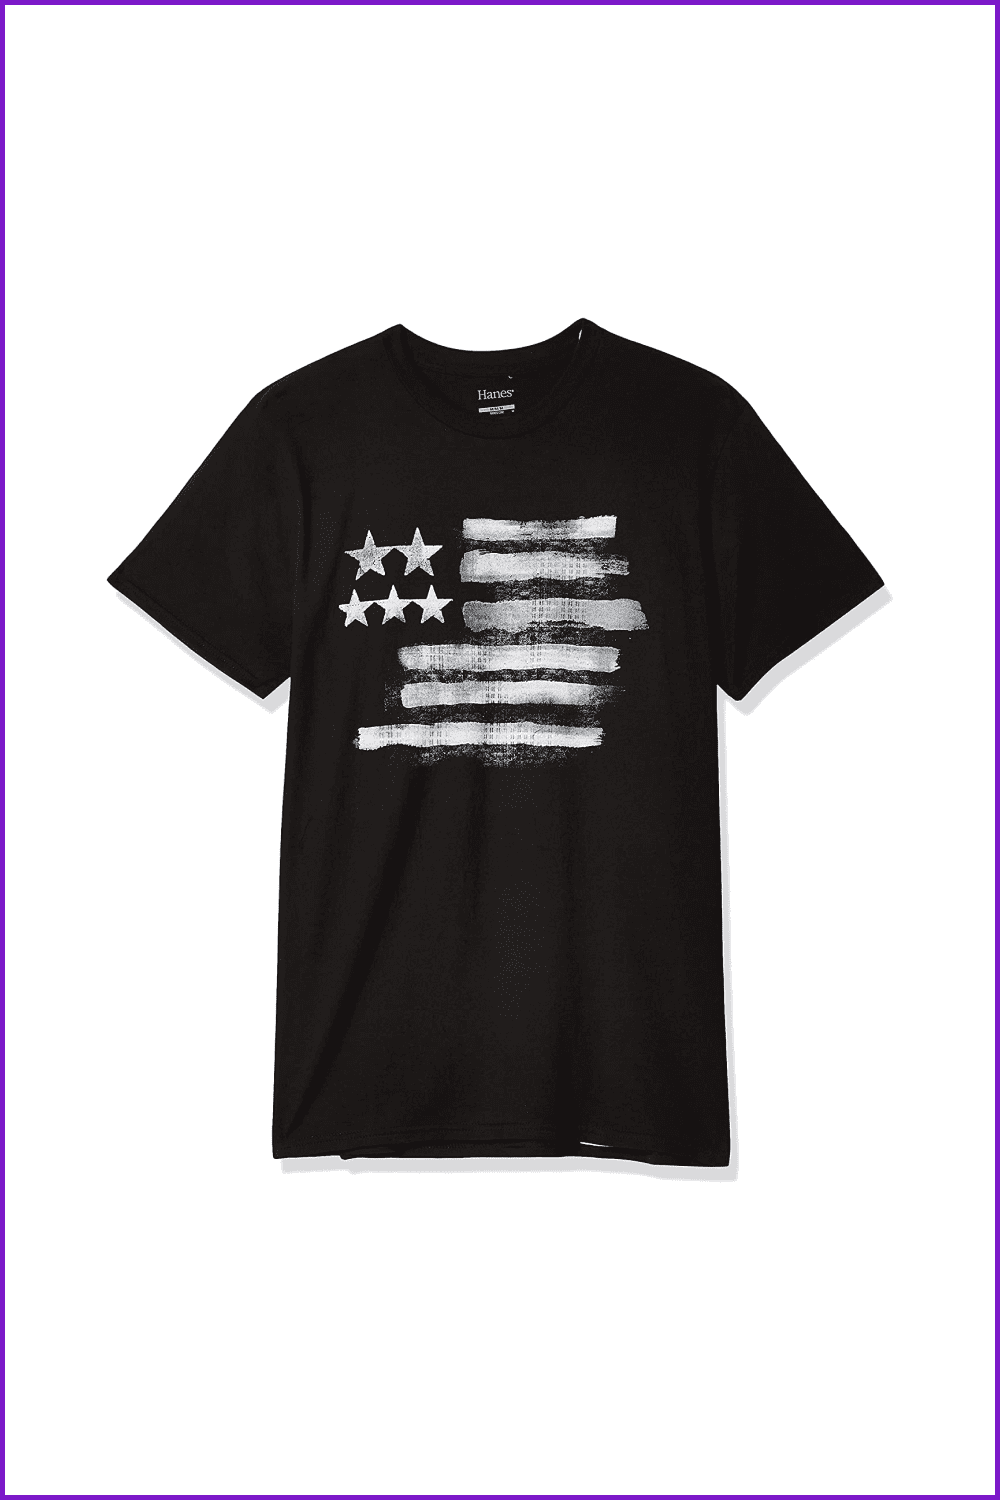 Hanes Men’s Graphic T-Shirt – Americana Collection.